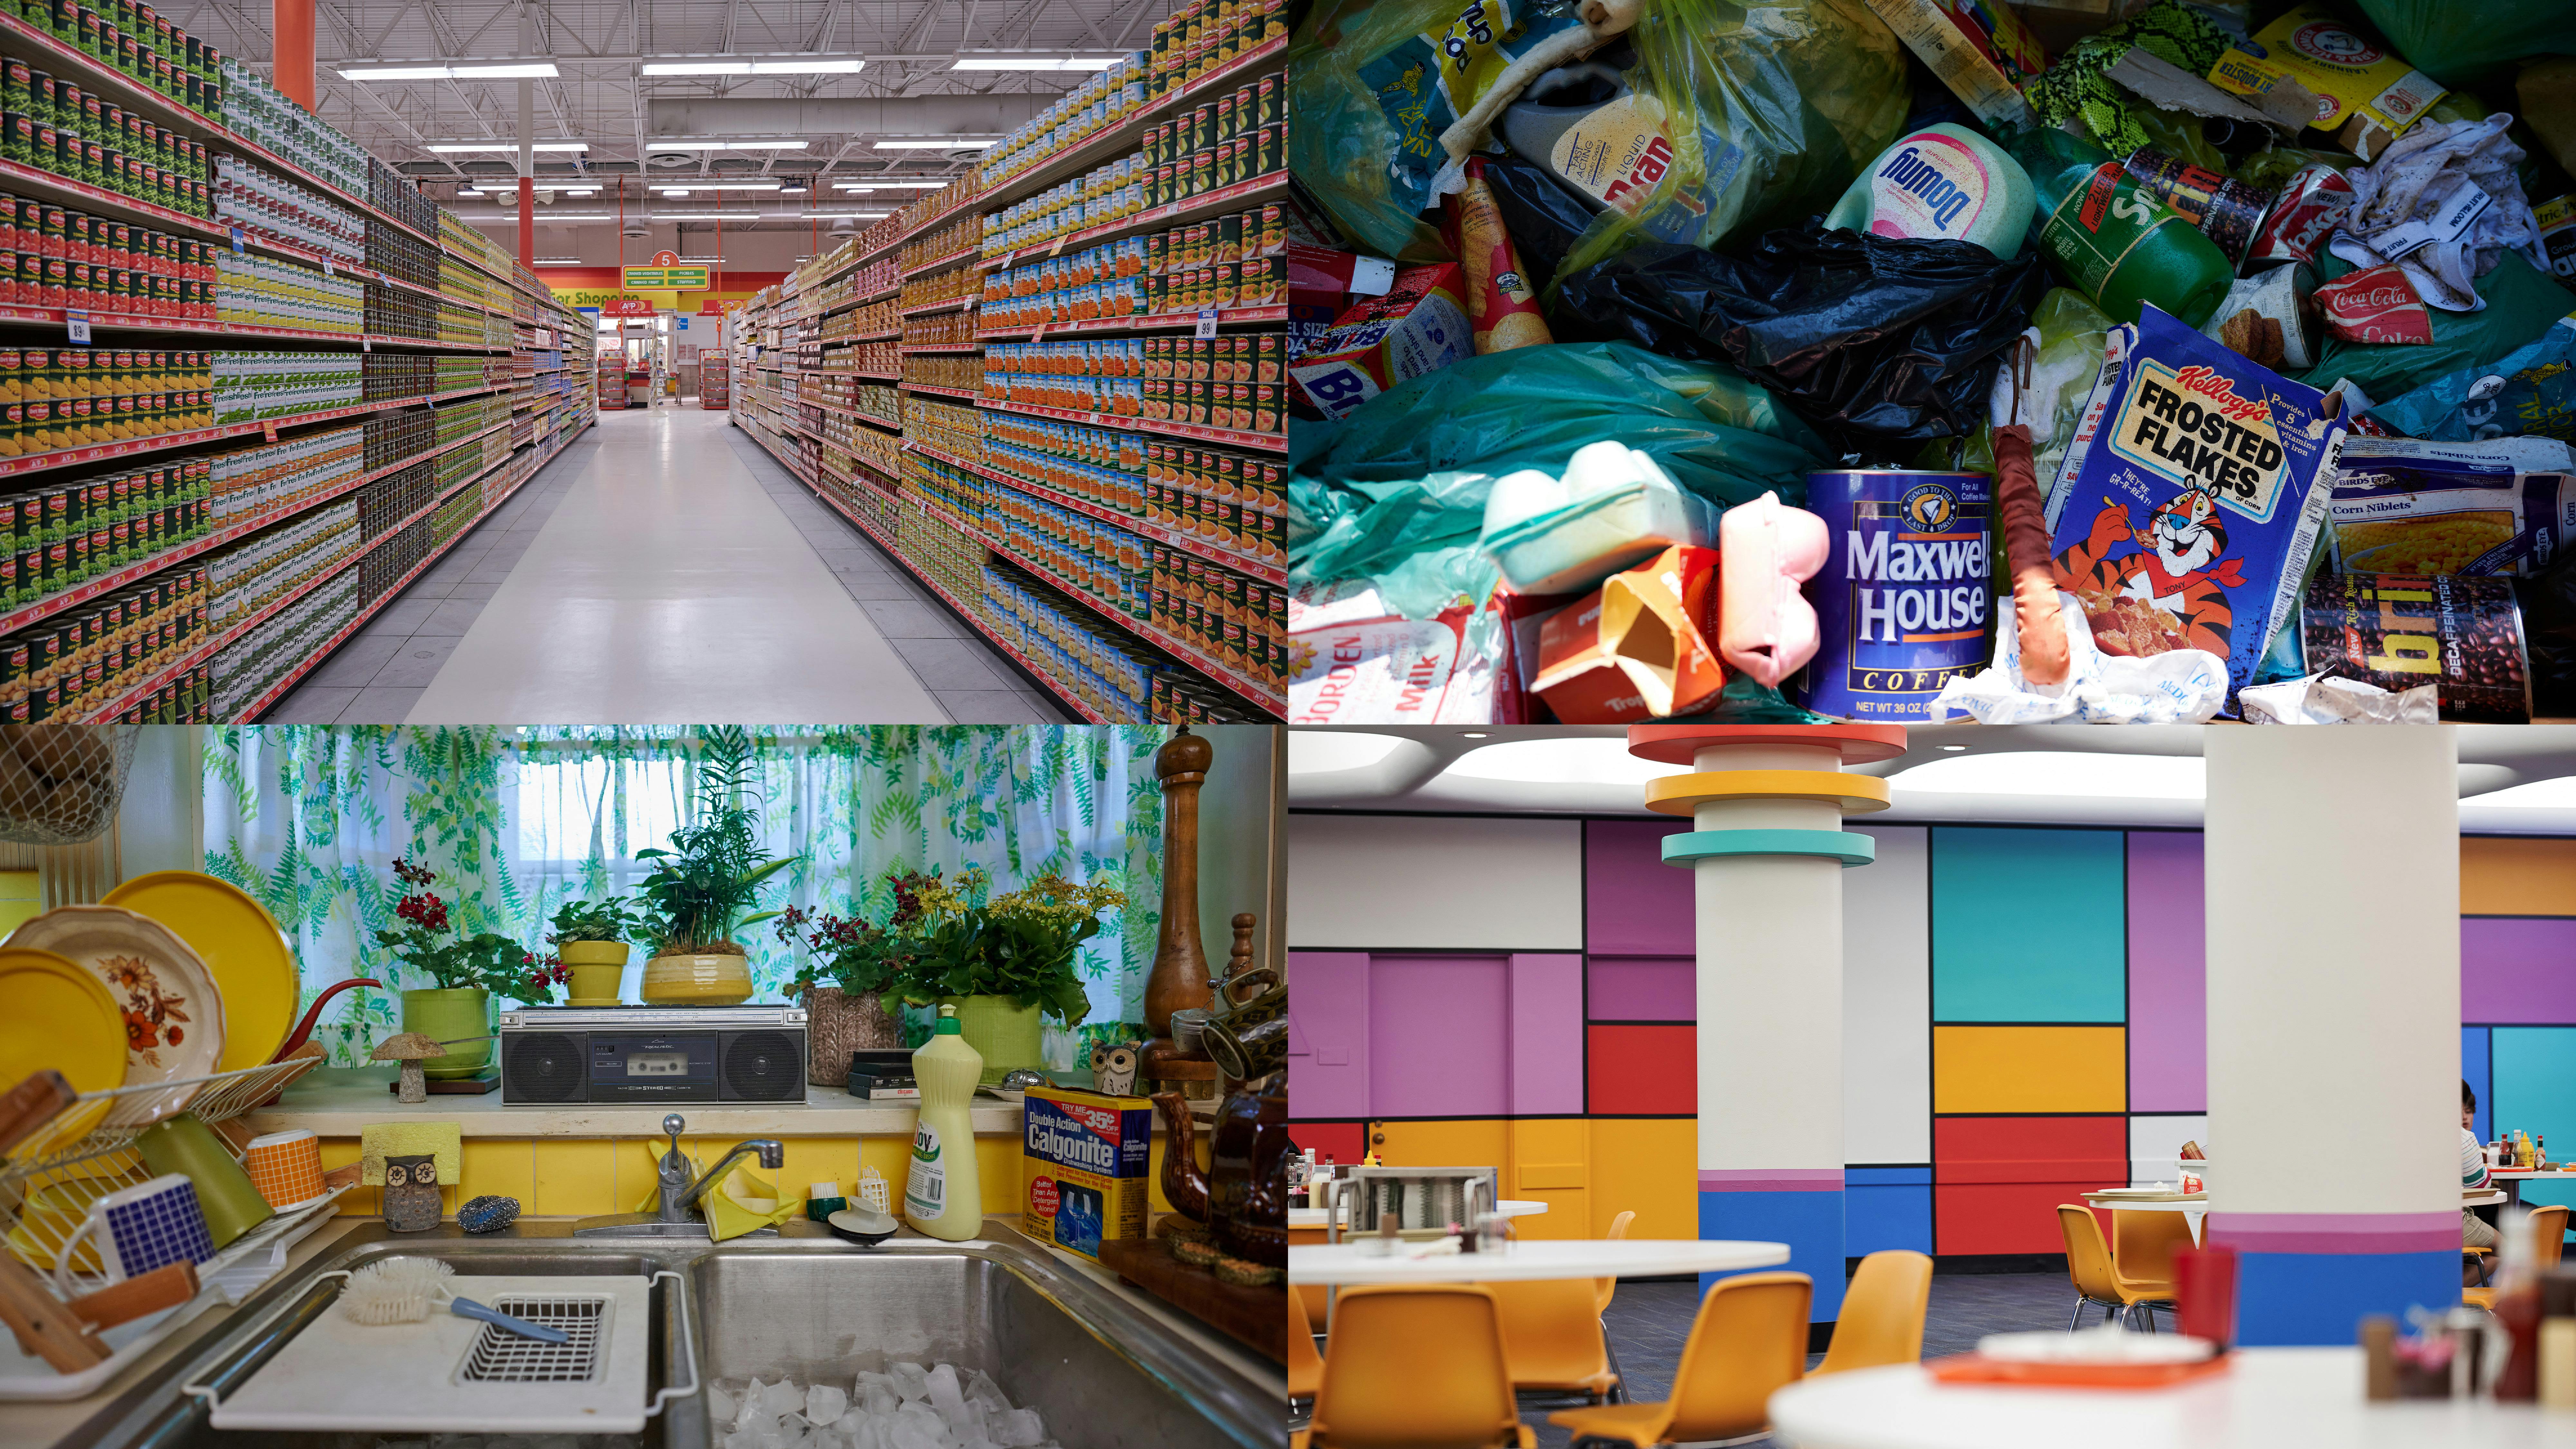 Four images in a grid: top left is a long grocery aisle, top right is a pile of trash, bottom left is a sink with mugs and other utensils in a drying rack, bottom right is a color-blocked dining hall.